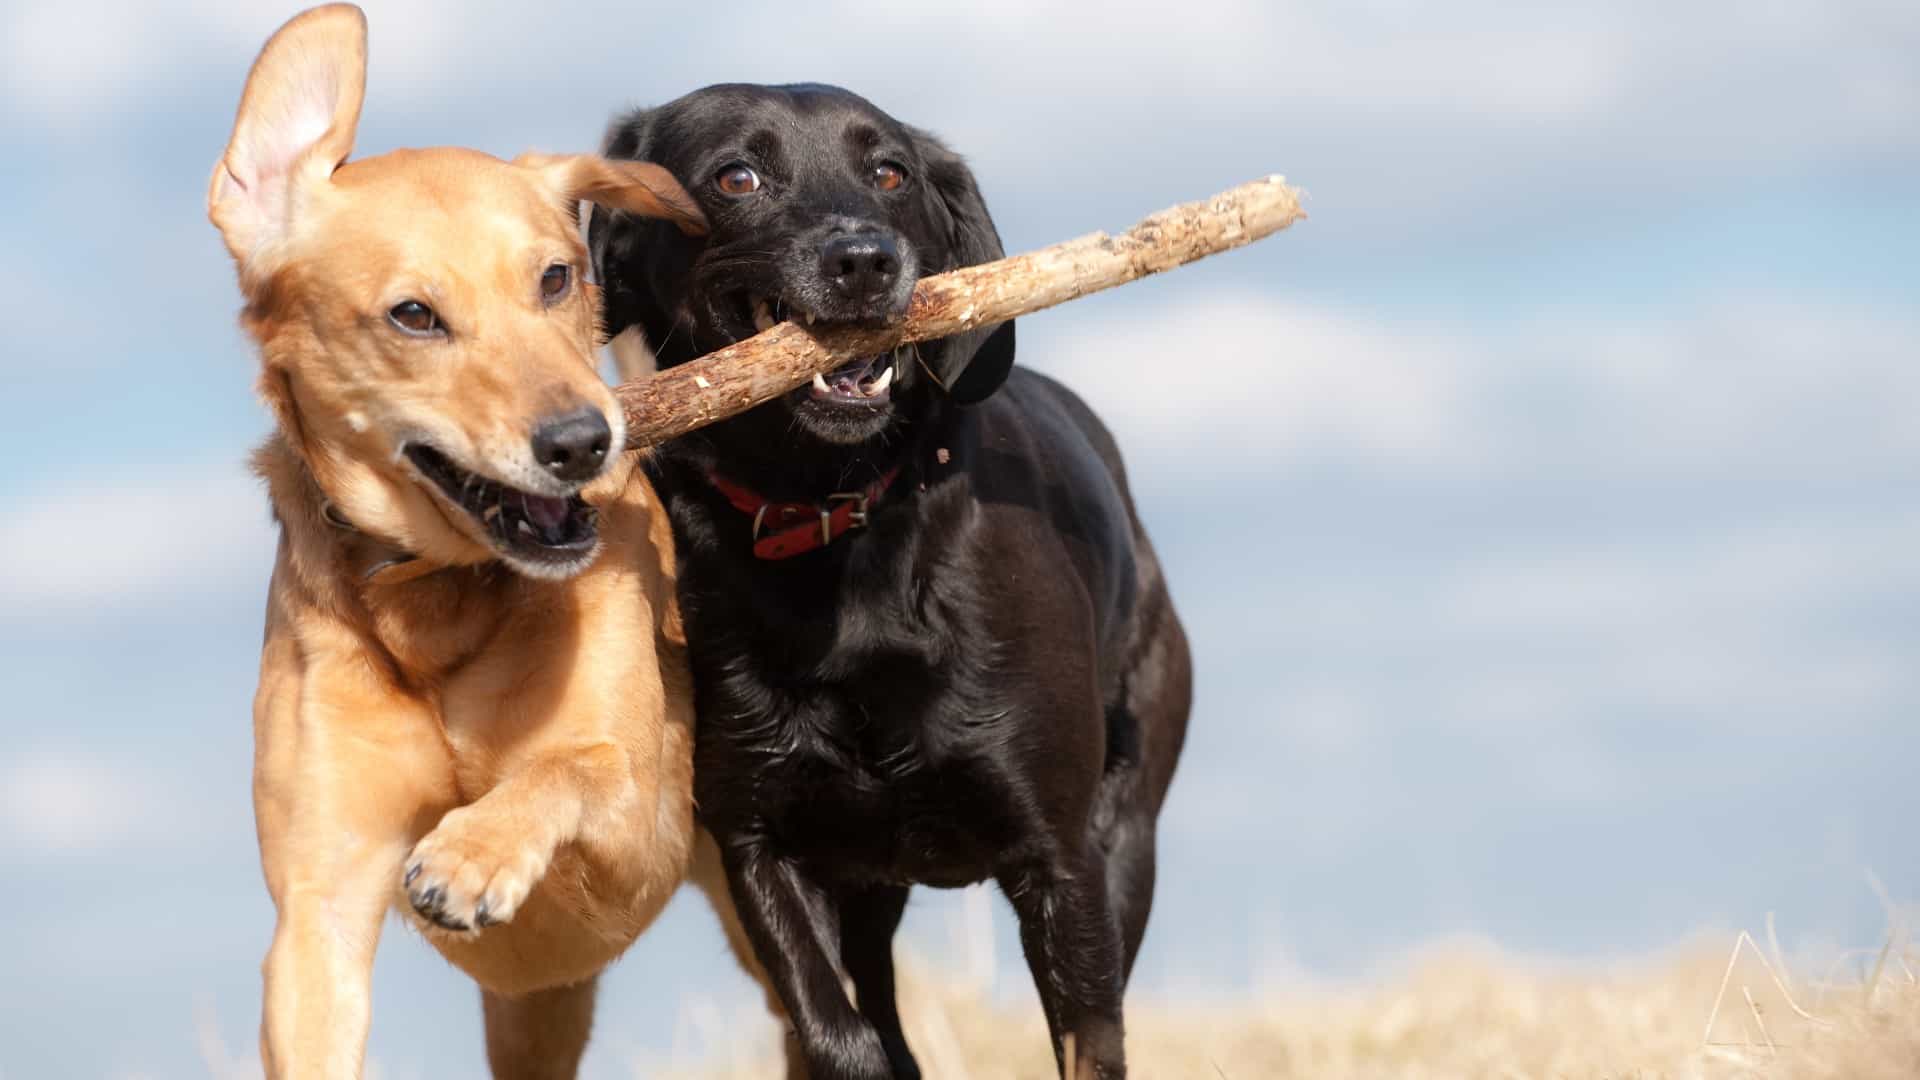 two dogs, a golden one and a black one, together carry a stick in their mouths as the run side by side with contented, happy looks on their faces.